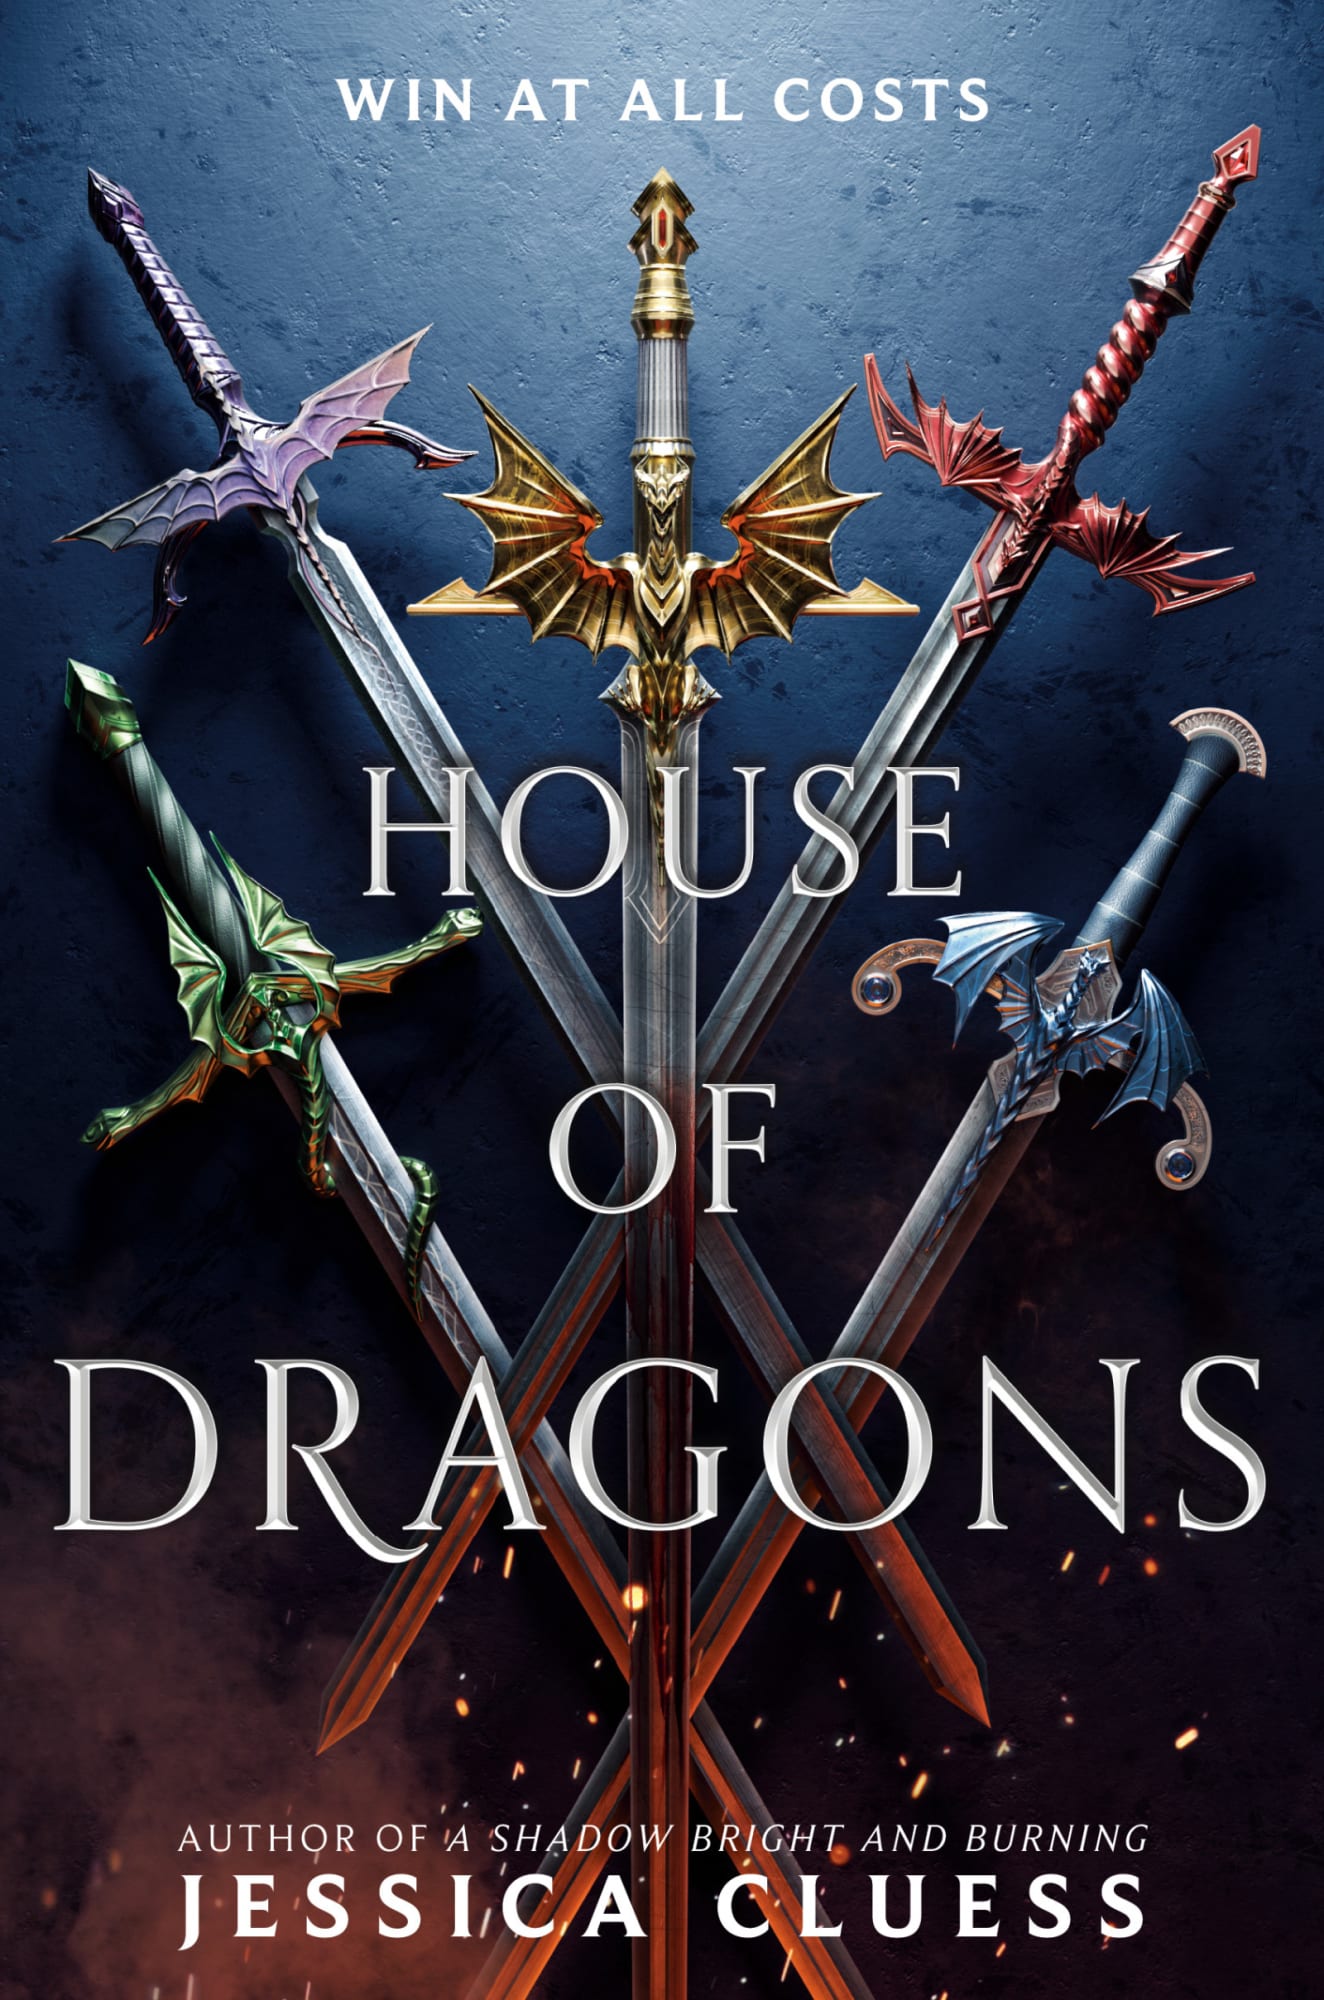 House of Dragons is the start of a magical new must-read fantasy series